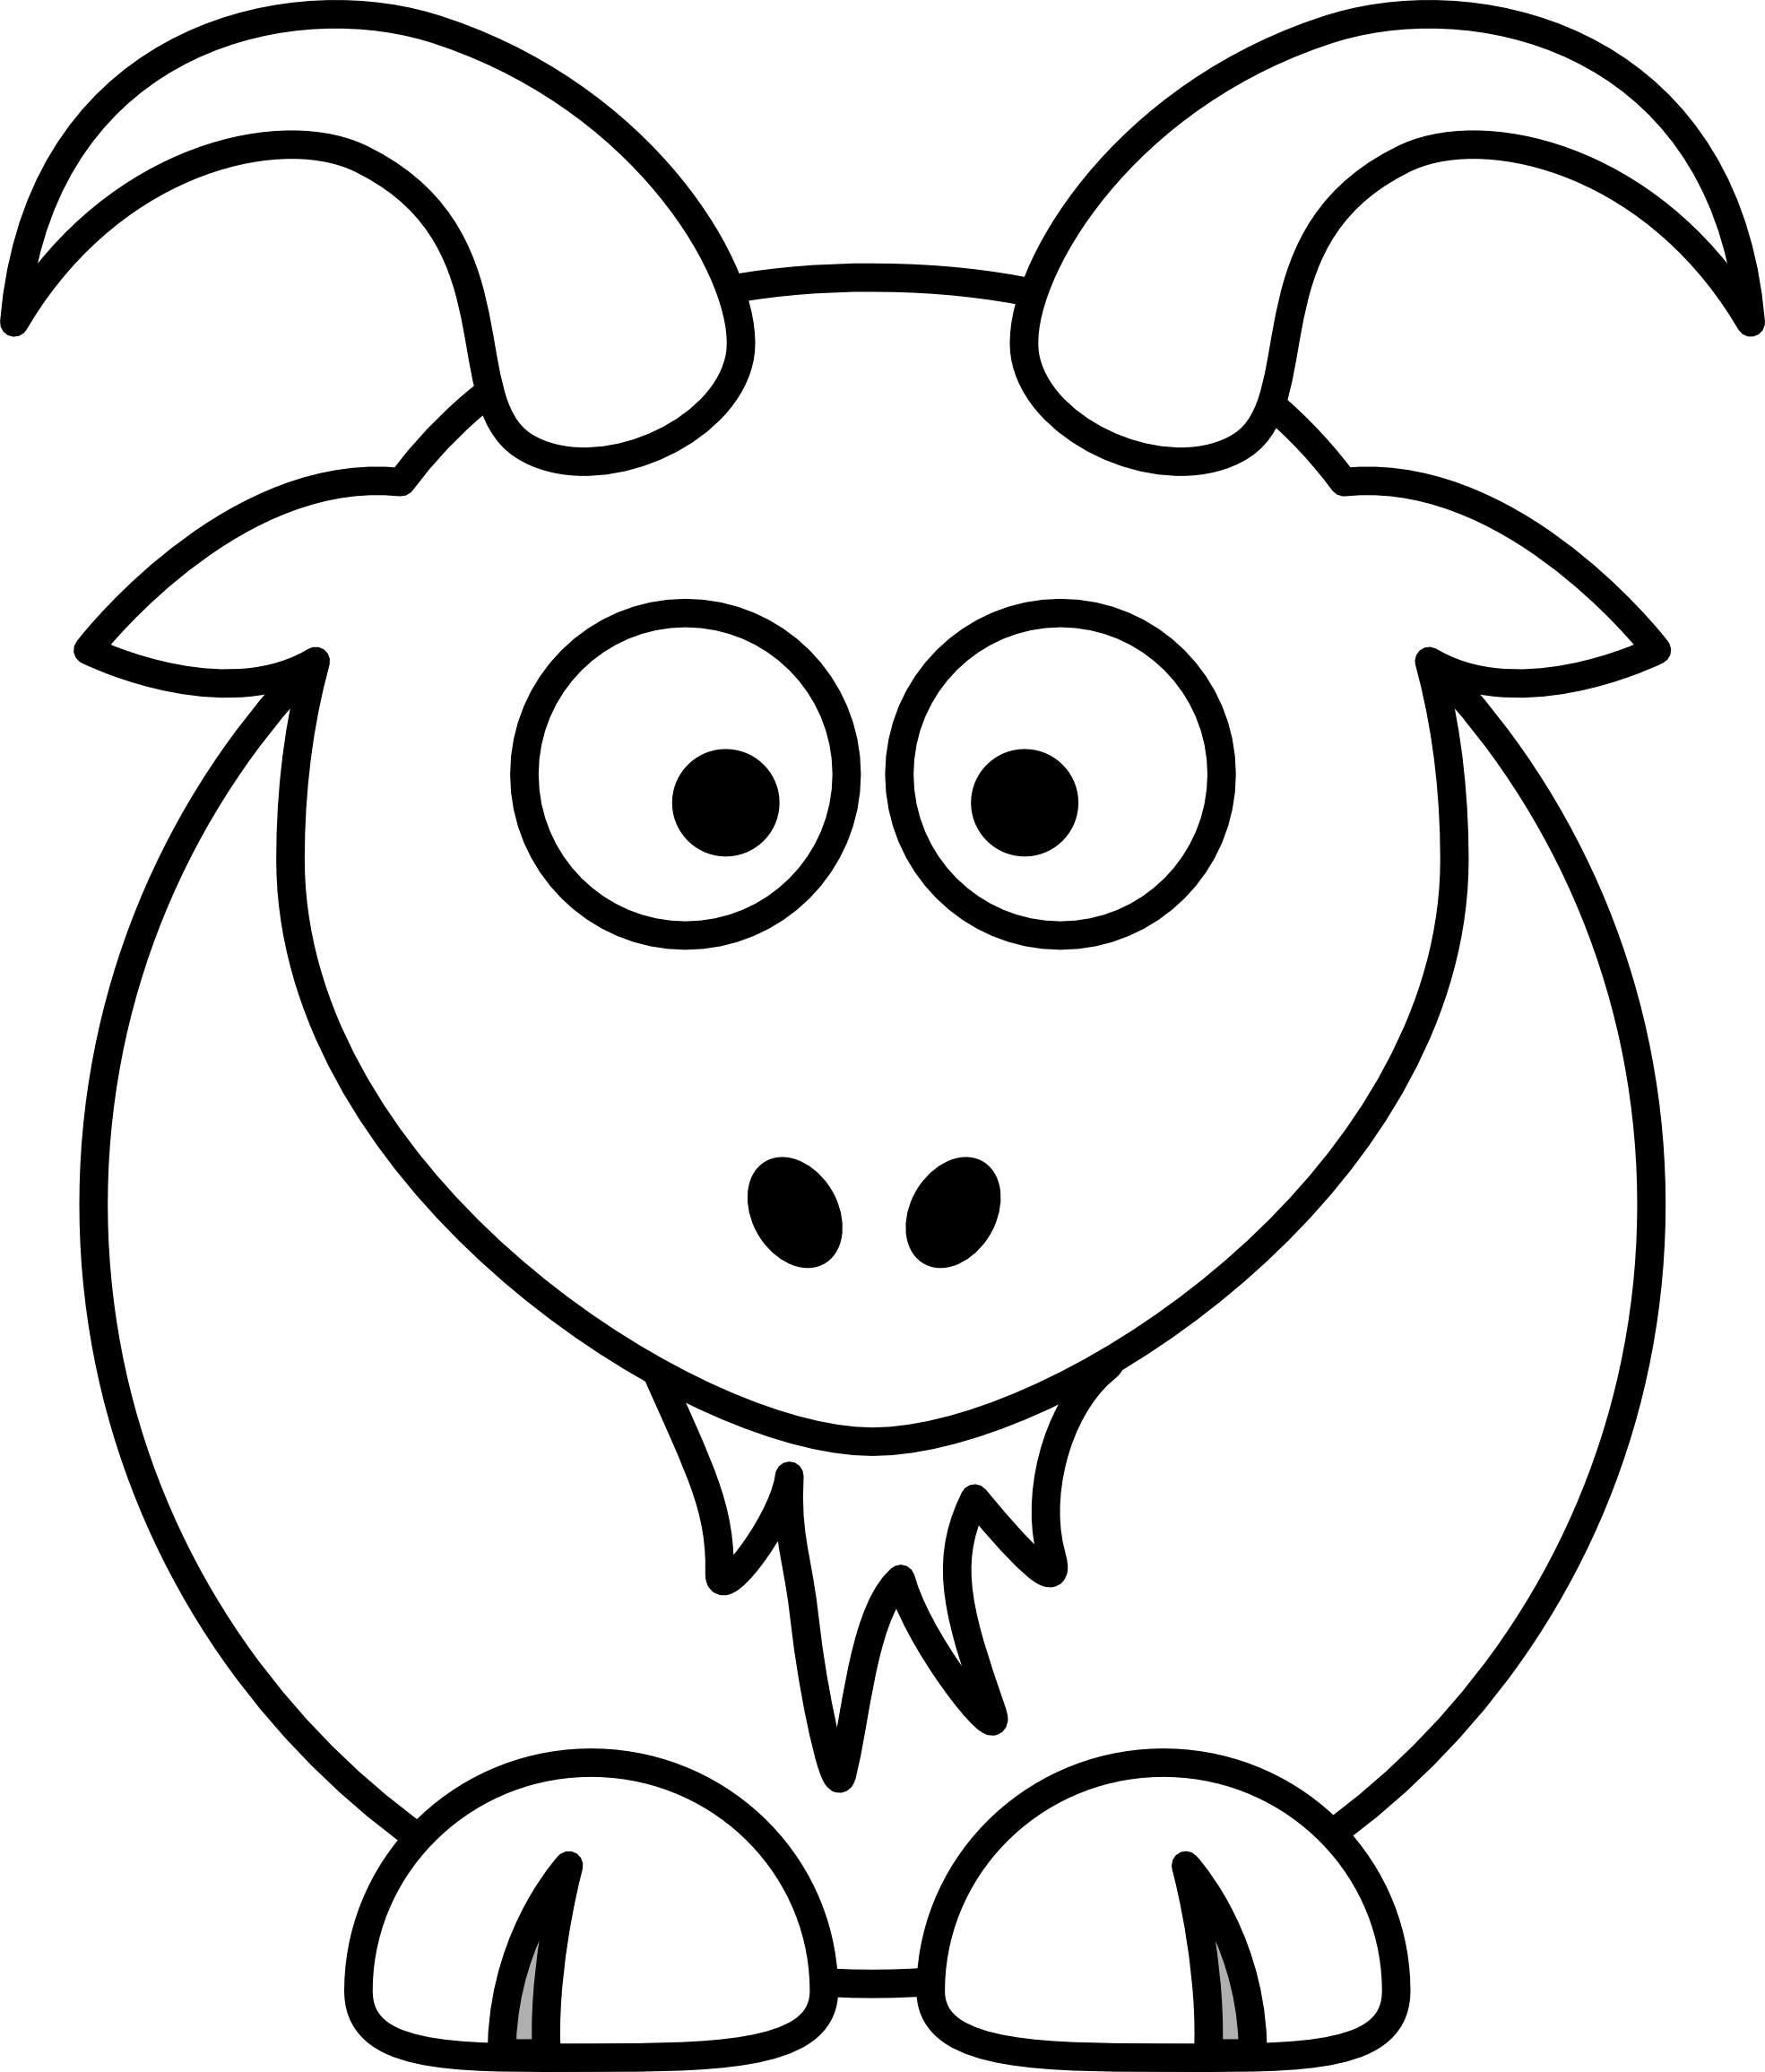 Simple Line Drawings Of Farm Animals | Line Drawing - ClipArt Best -  ClipArt Best